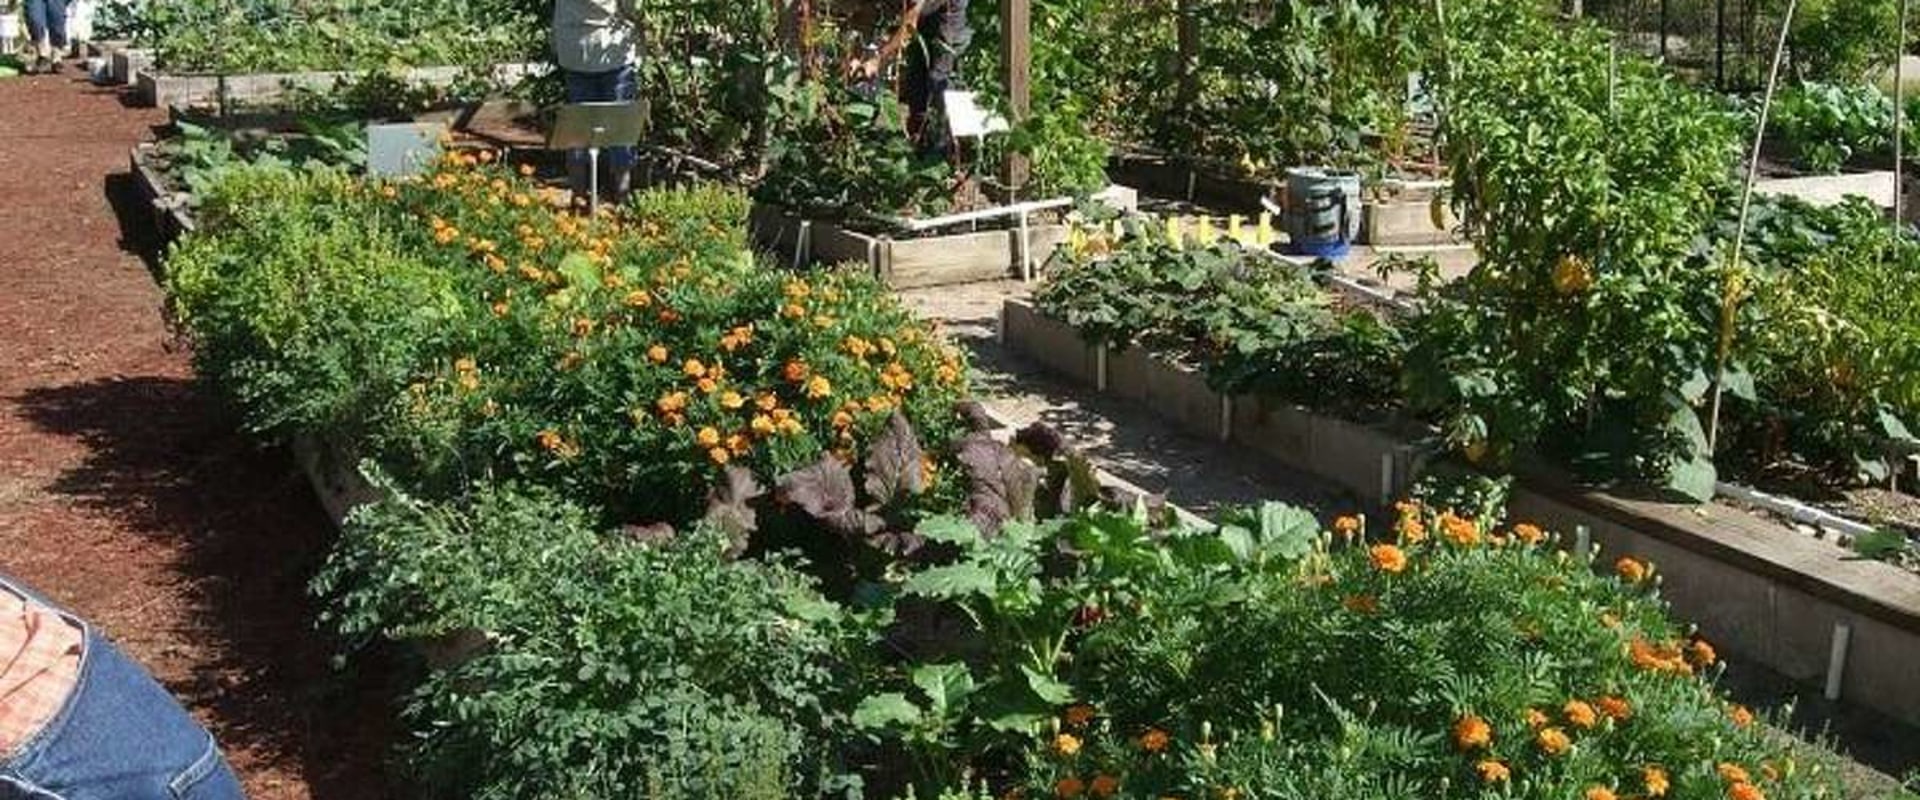 Gardening Resources in Conroe, Texas: Where to Start